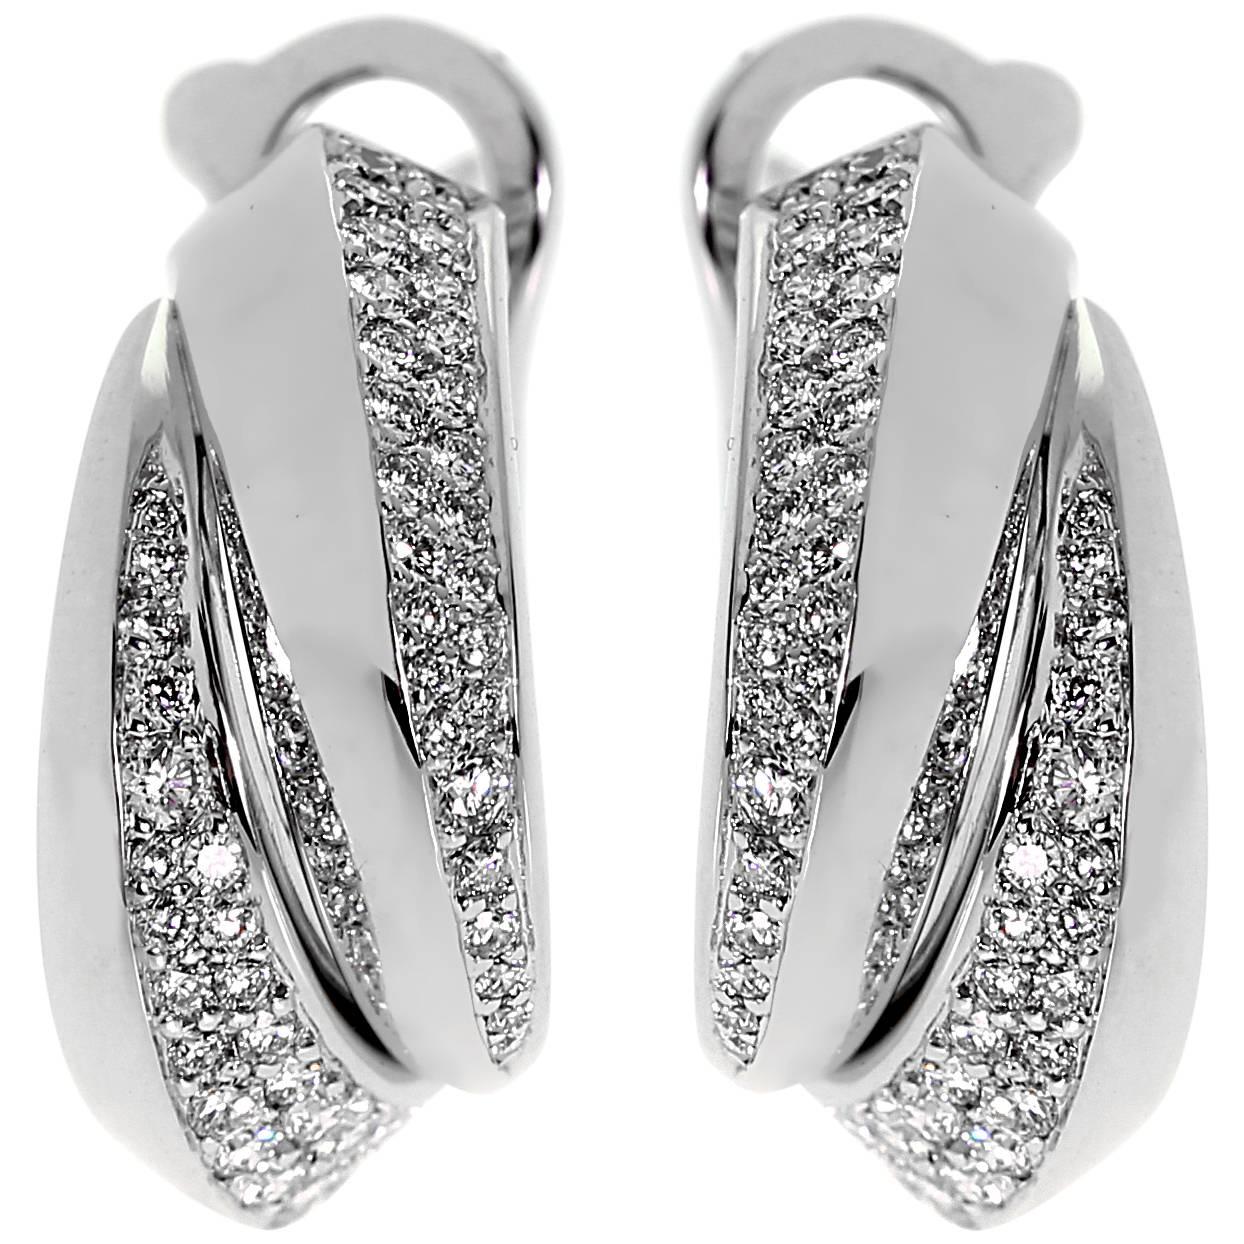 Cartier Panthere Diamond White Gold Earrings